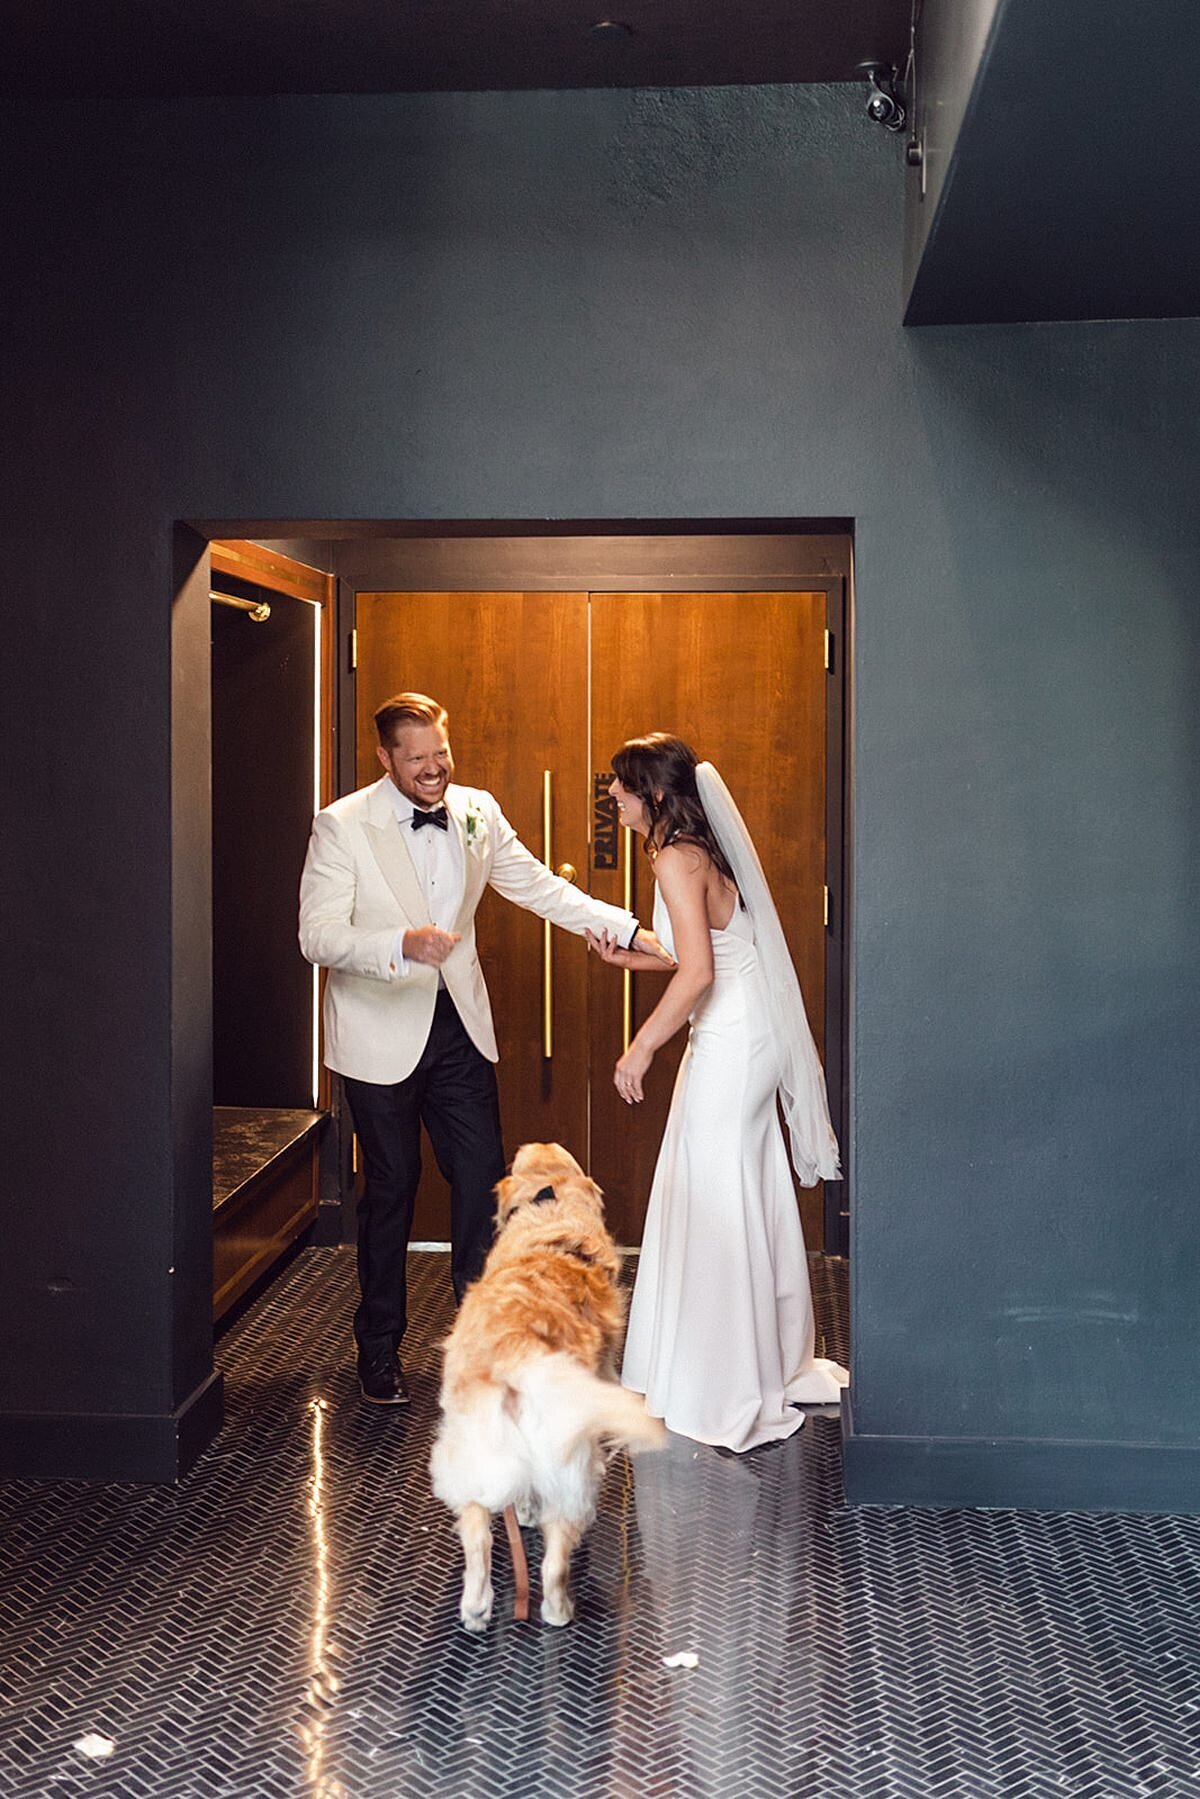 The bride, wearing a silk halter top sheath wedding dress and long veil and the groom wearing a tuxedo with a white jacket share a first look with their best man, their golden retriever Frank in the entry way of Clementine Hall.